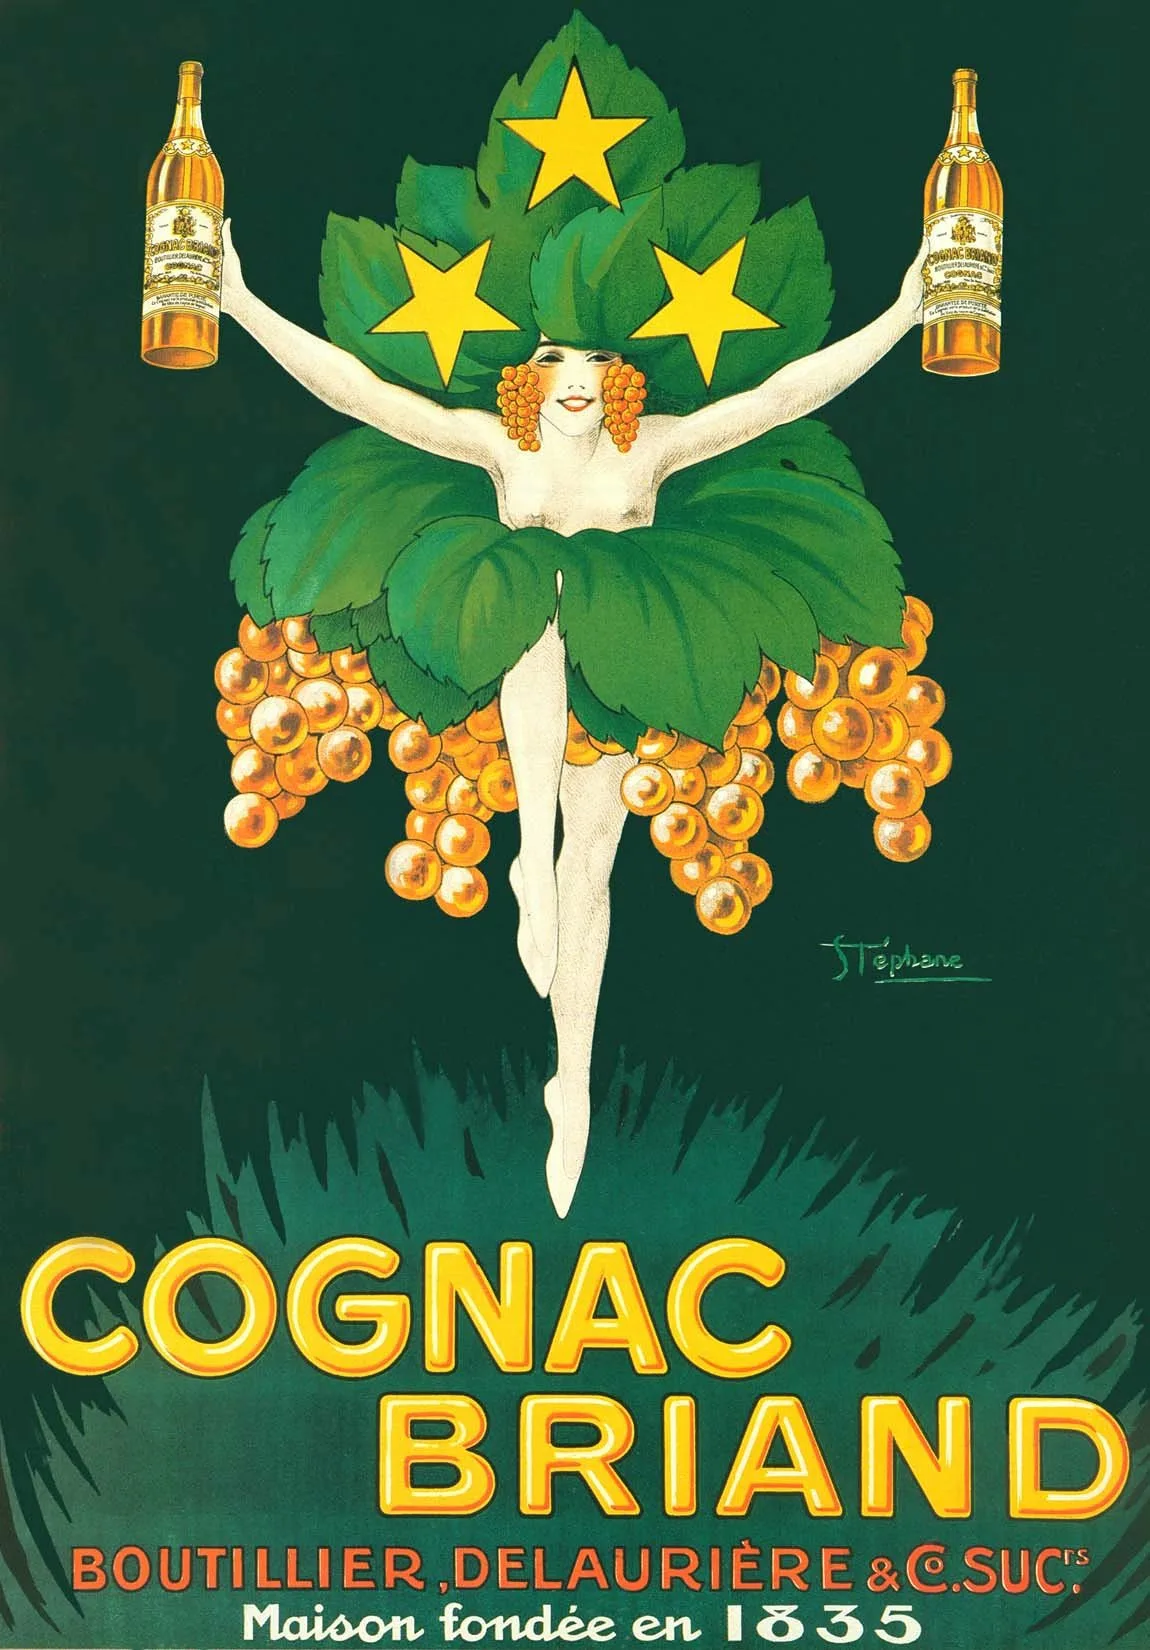 Poster, Cognac Briand, Giclee on watercolor paper